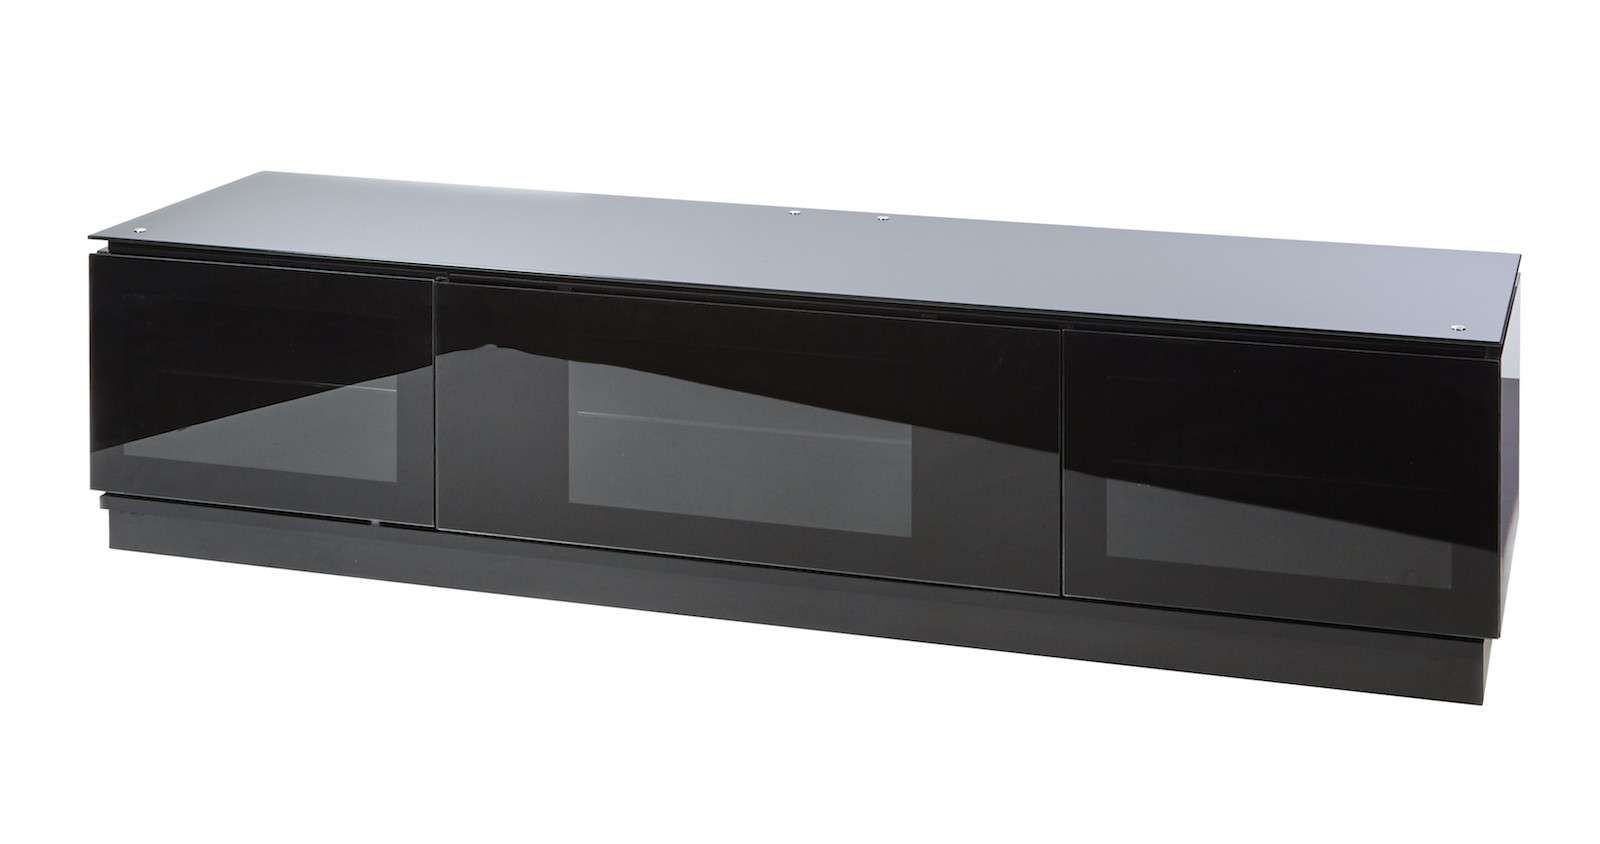 Black Gloss Tv Unit Up To 80 Inch Flat Screen Tv | Mmt D1800 Throughout Shiny Black Tv Stands (Gallery 1 of 15)